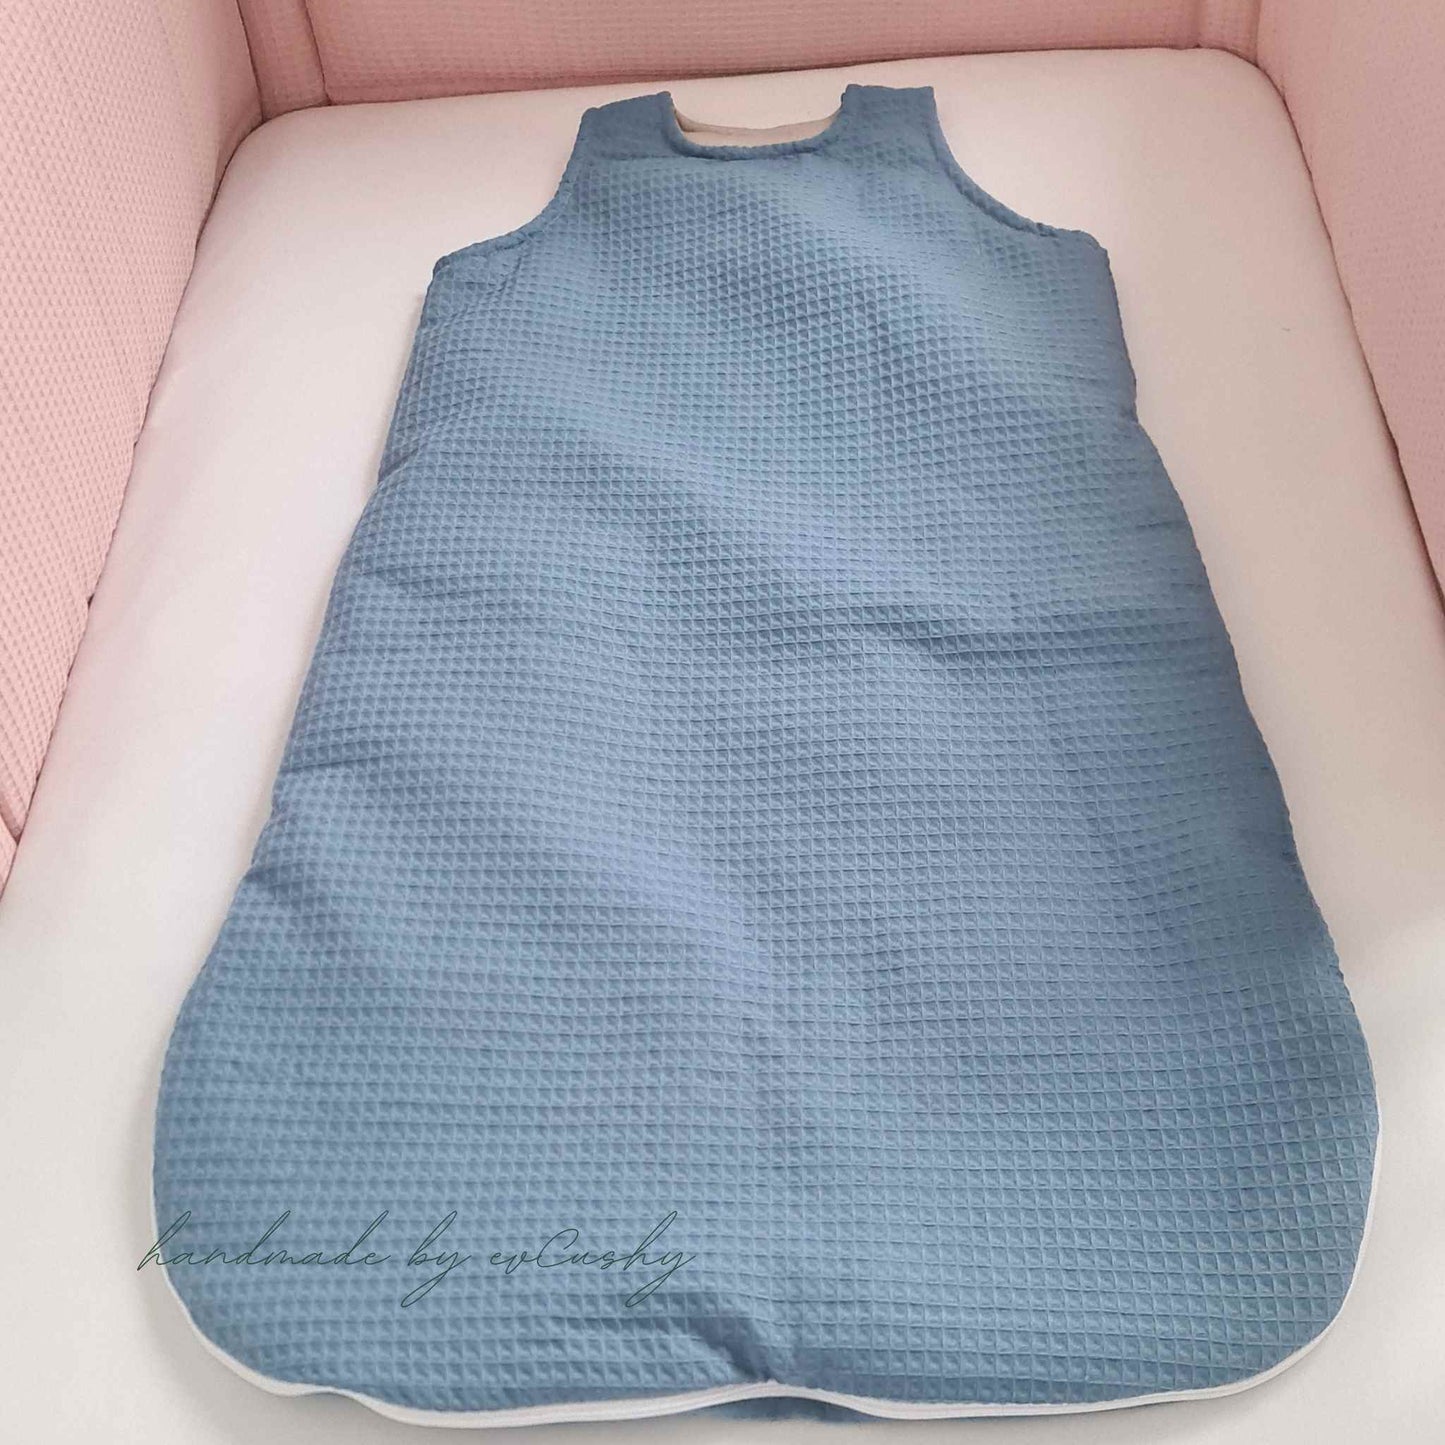 plain sleeping bag for baby blue, 100% cotton 6-18 months in Ireland 90cm long